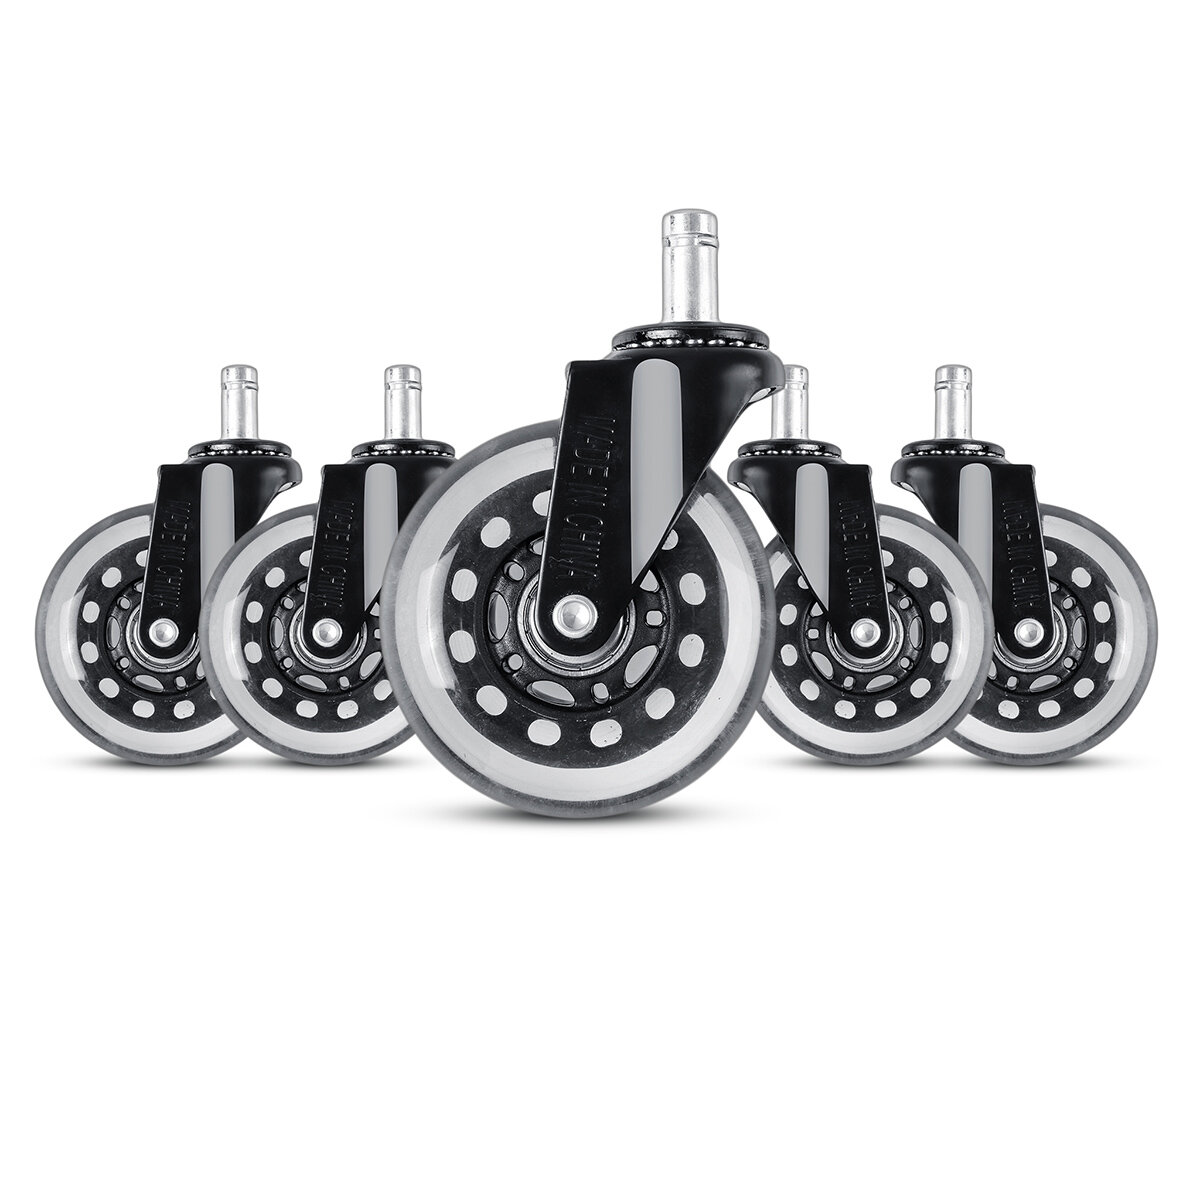 Wholesale 1.5inch 40mm Black furniture swivel caster universal Castor Multidirectional with not brake lock  omnidirectional Wheels From m.alibaba.com